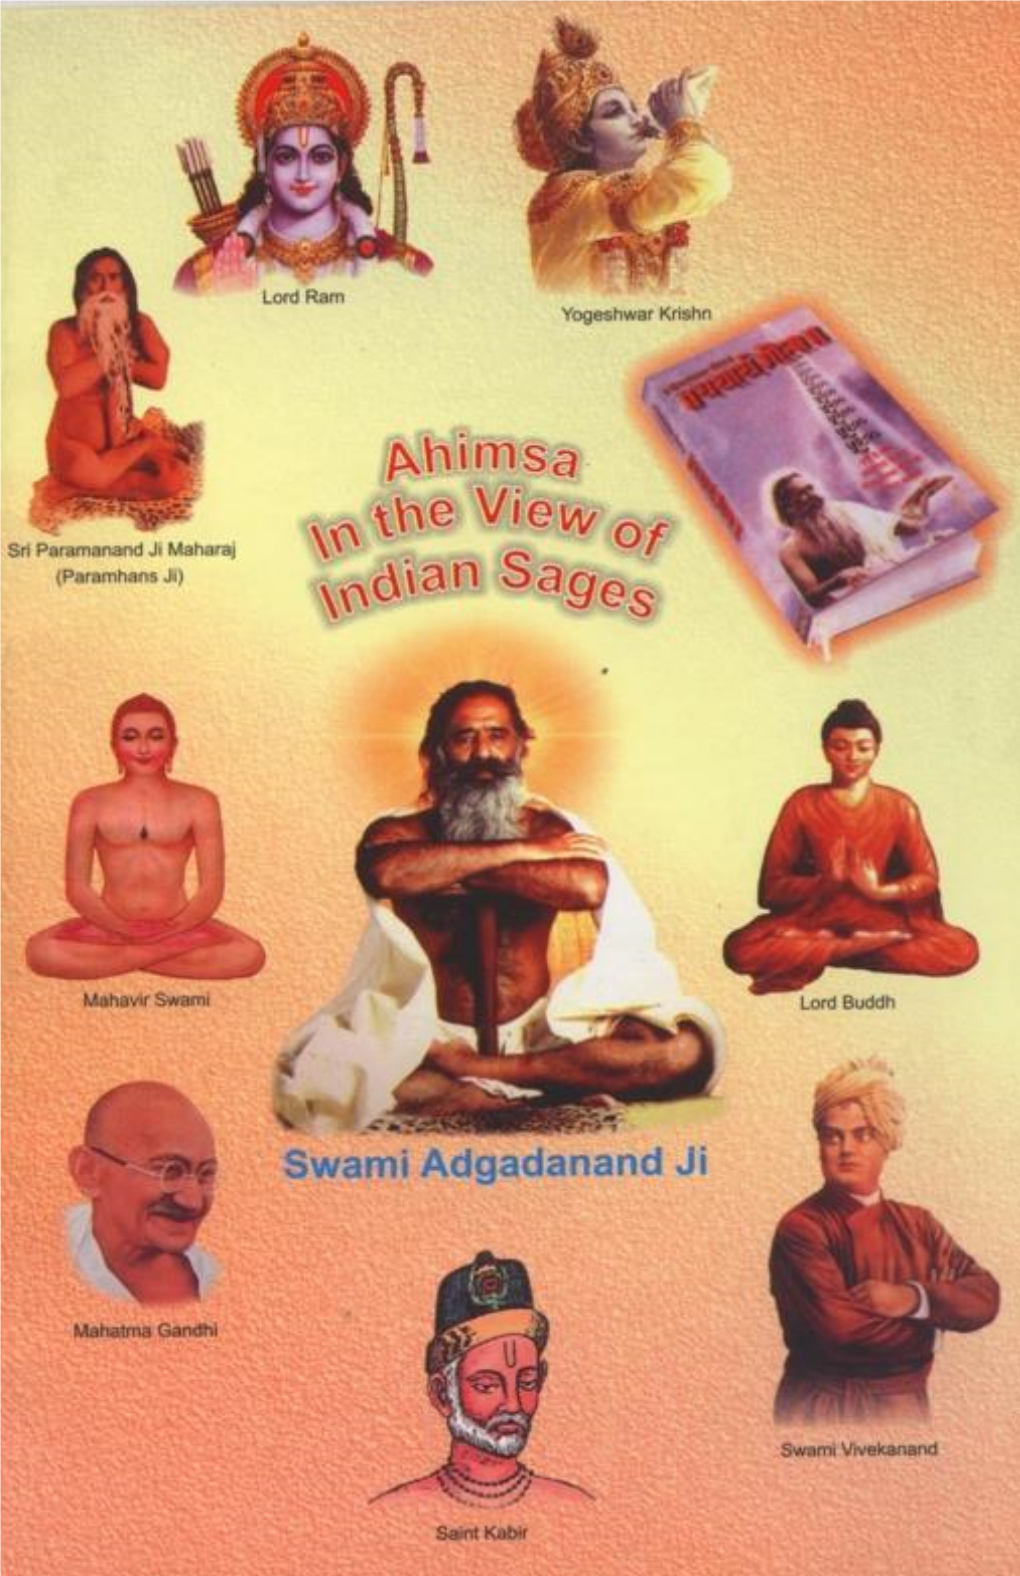 Ahimsa: in the Light of Indian Sages